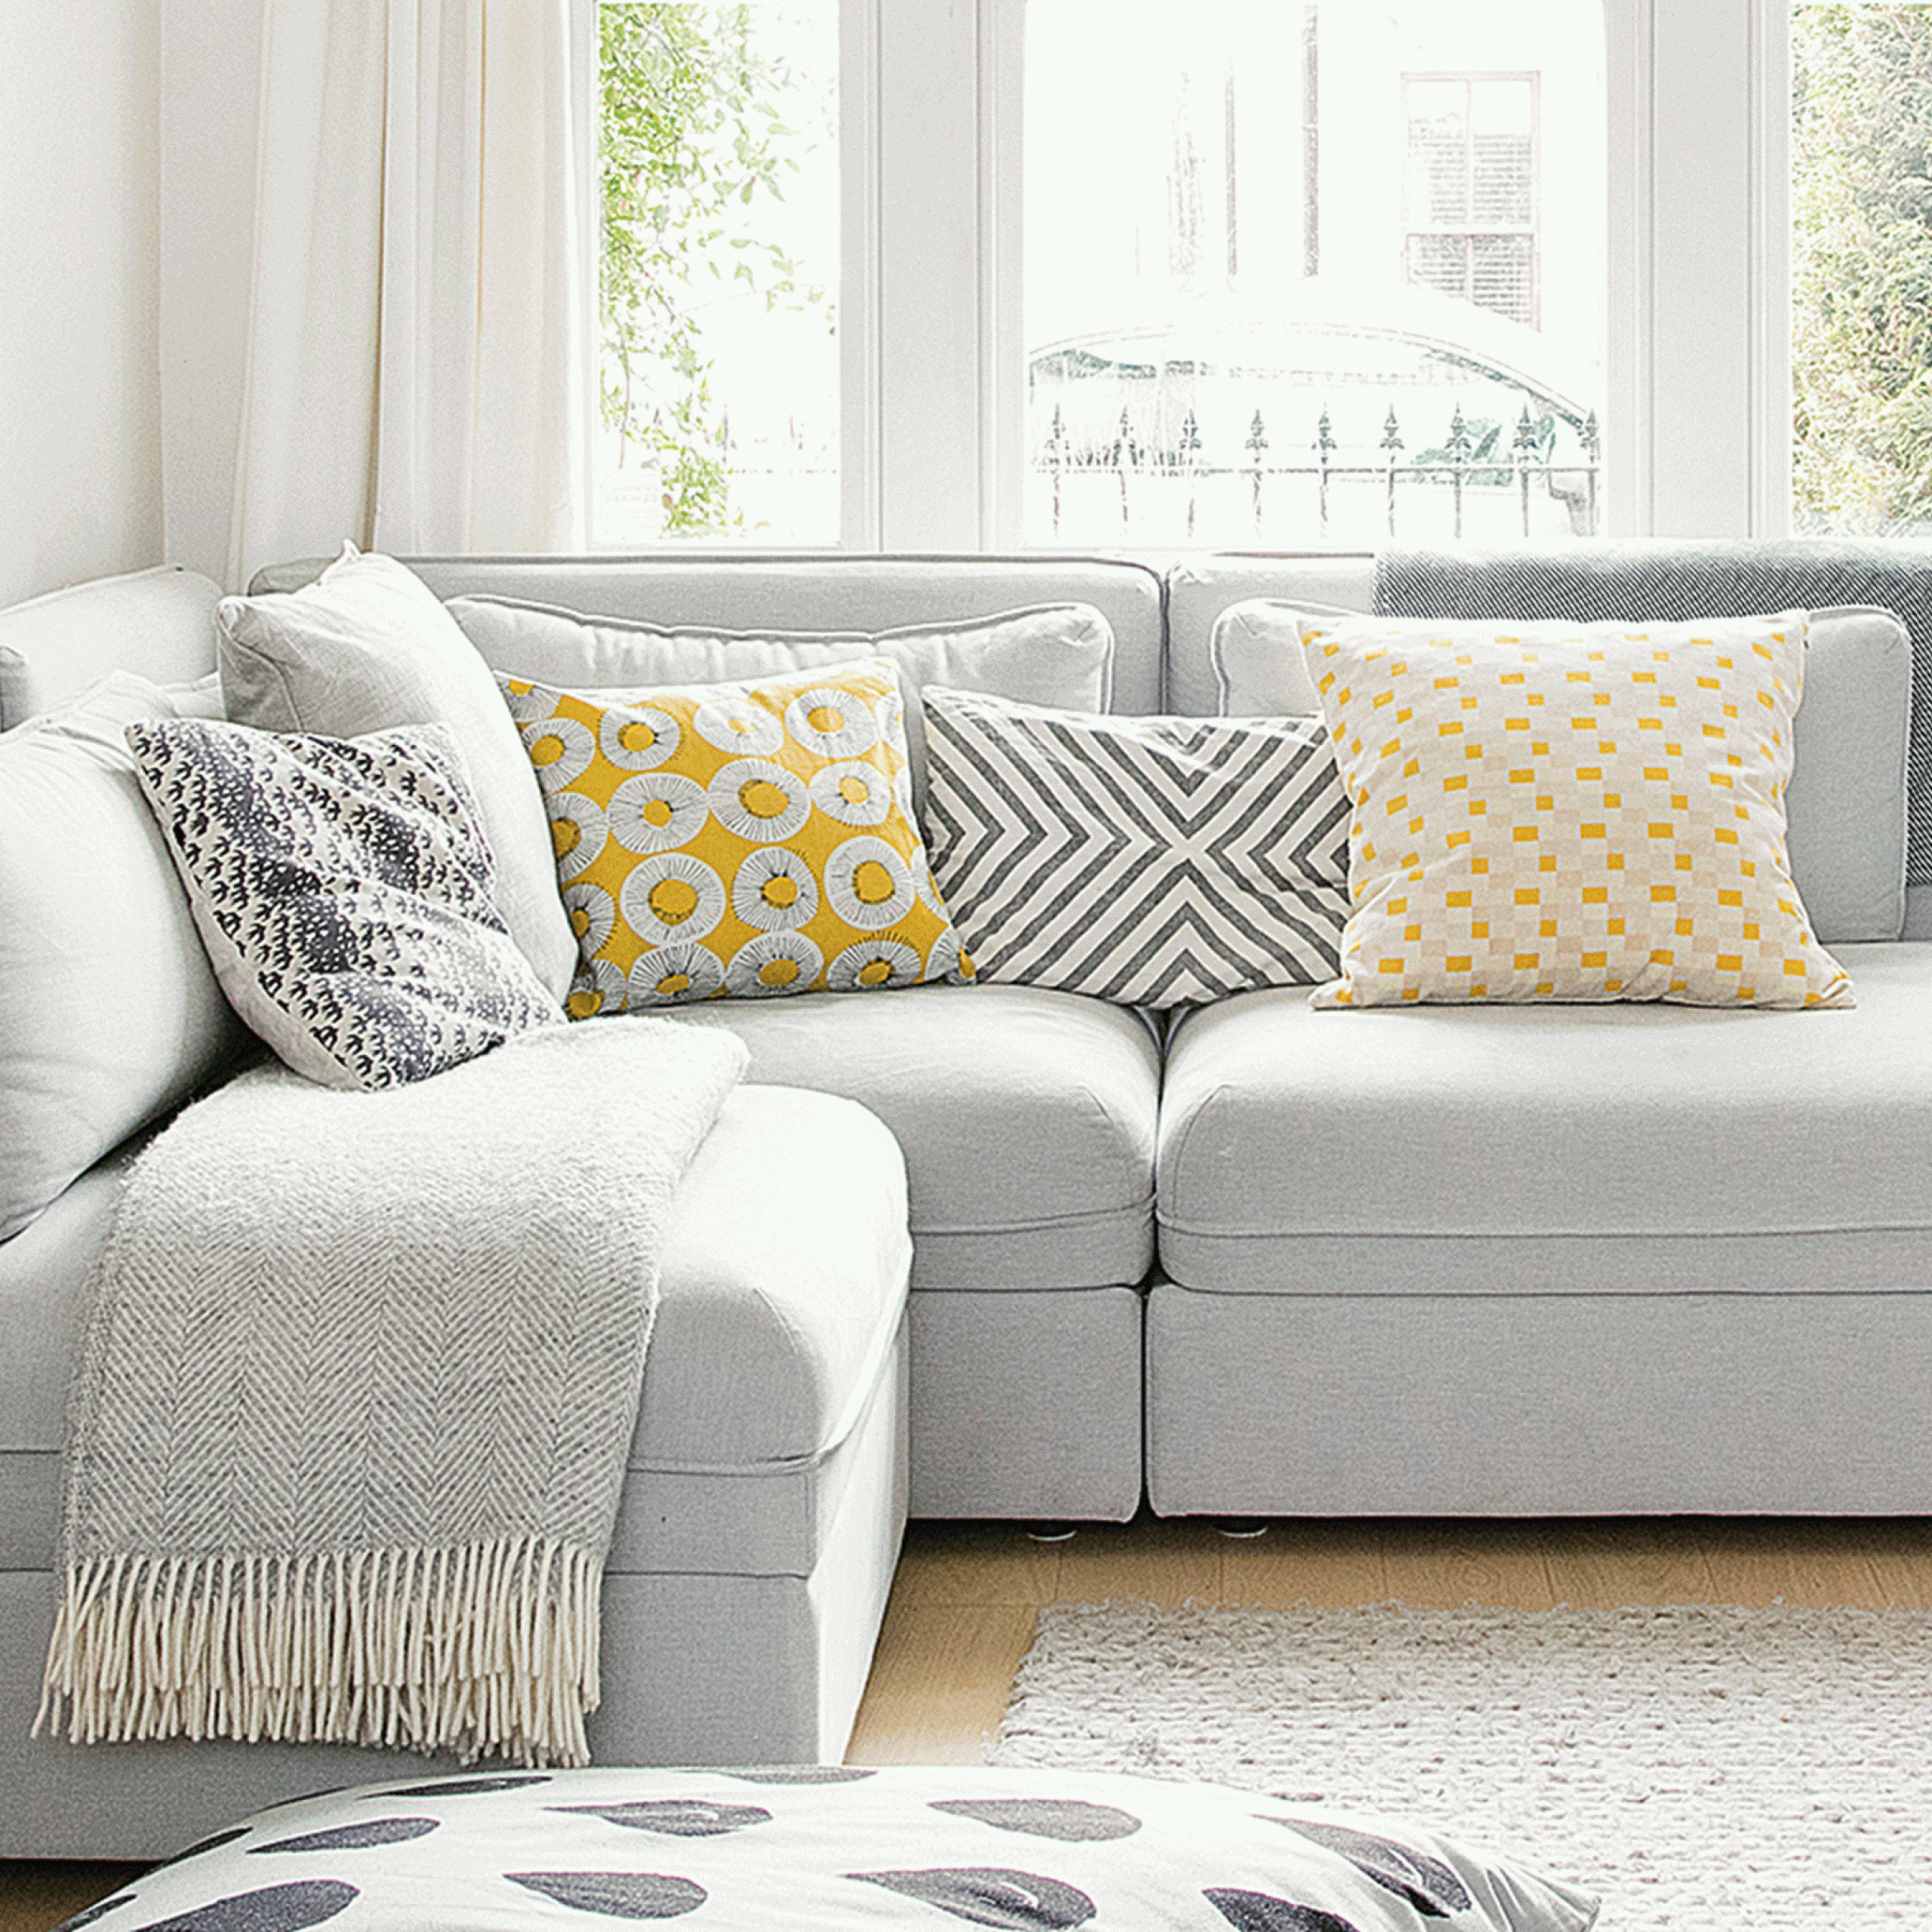 16 Sofa Ideas For Small Living Rooms: Looks, Styles And Tips | Ideal Home Within Sofas For Living Rooms (View 14 of 15)